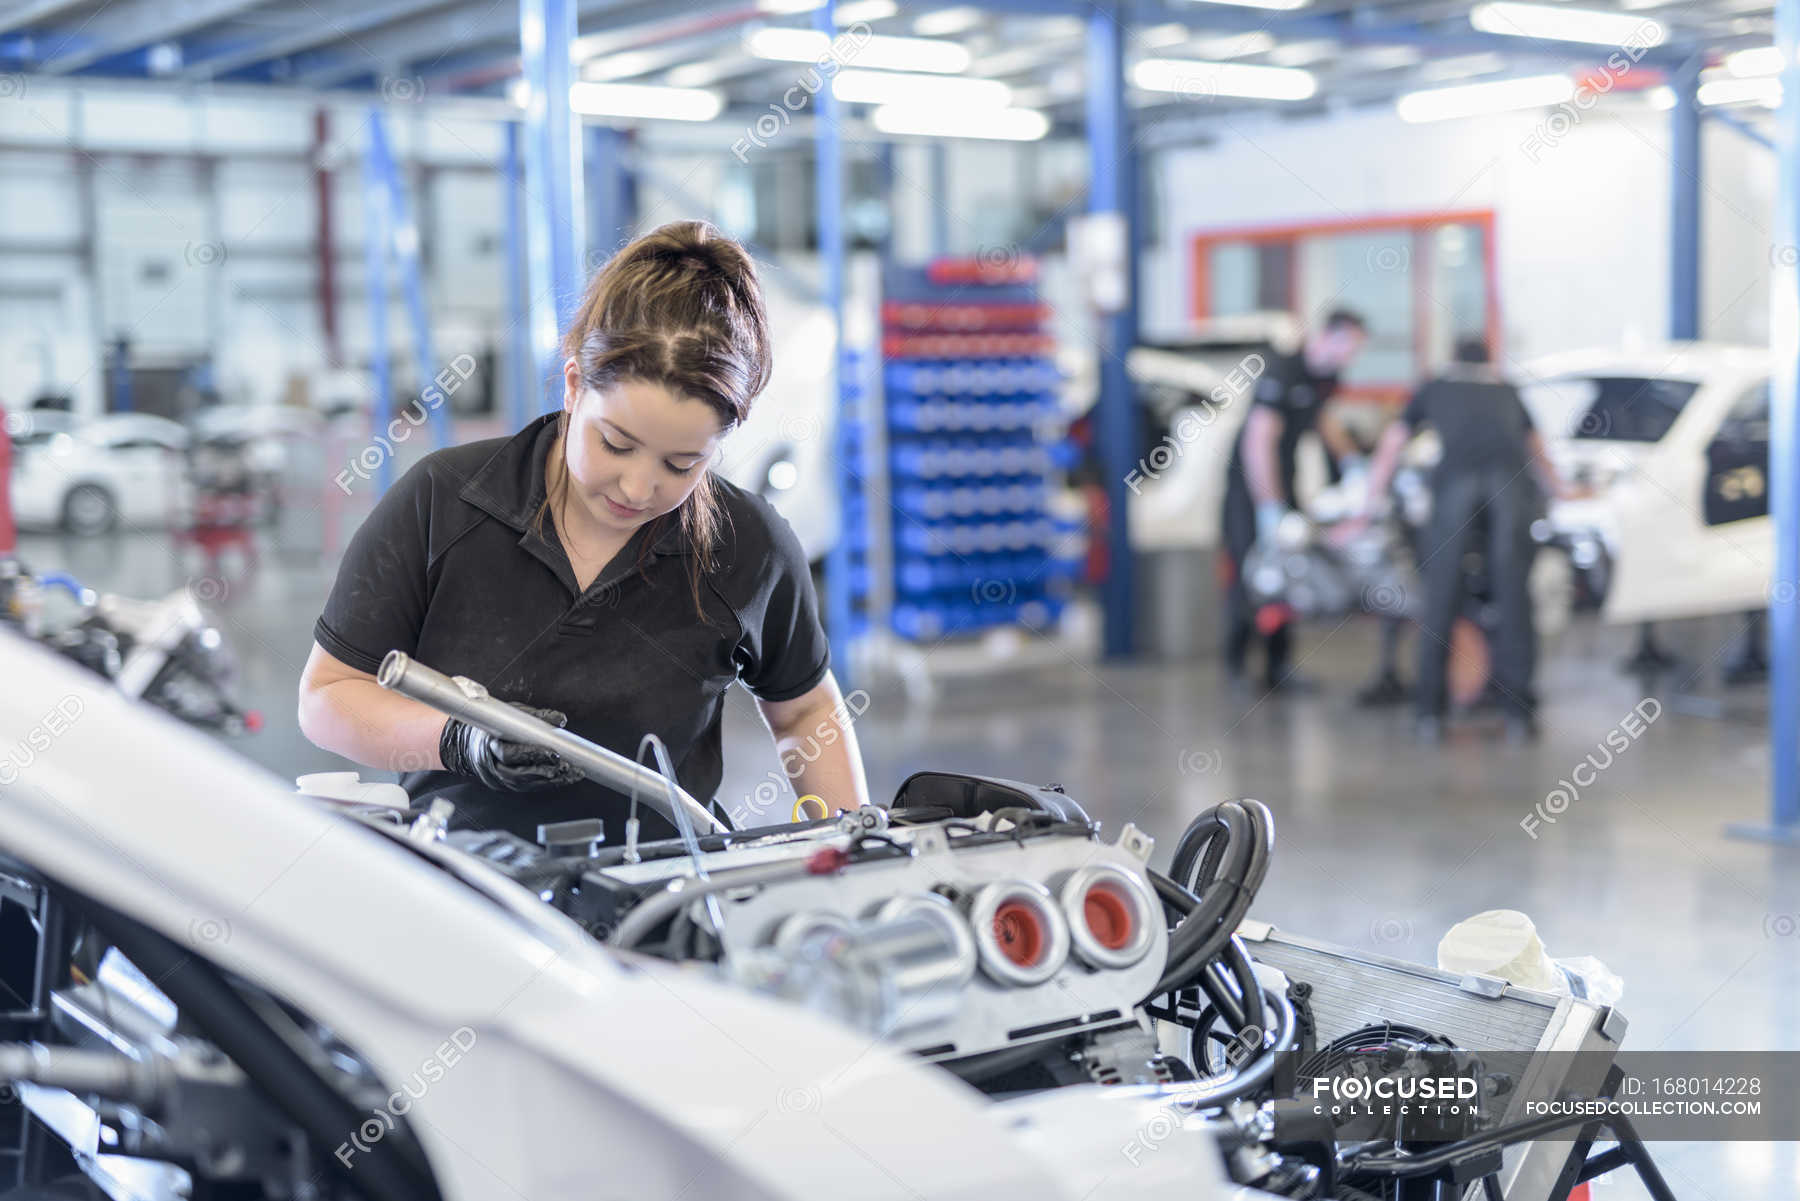 Female engineer assembles car in racing car factory — engineering,  automobile factory - Stock Photo | #168014228